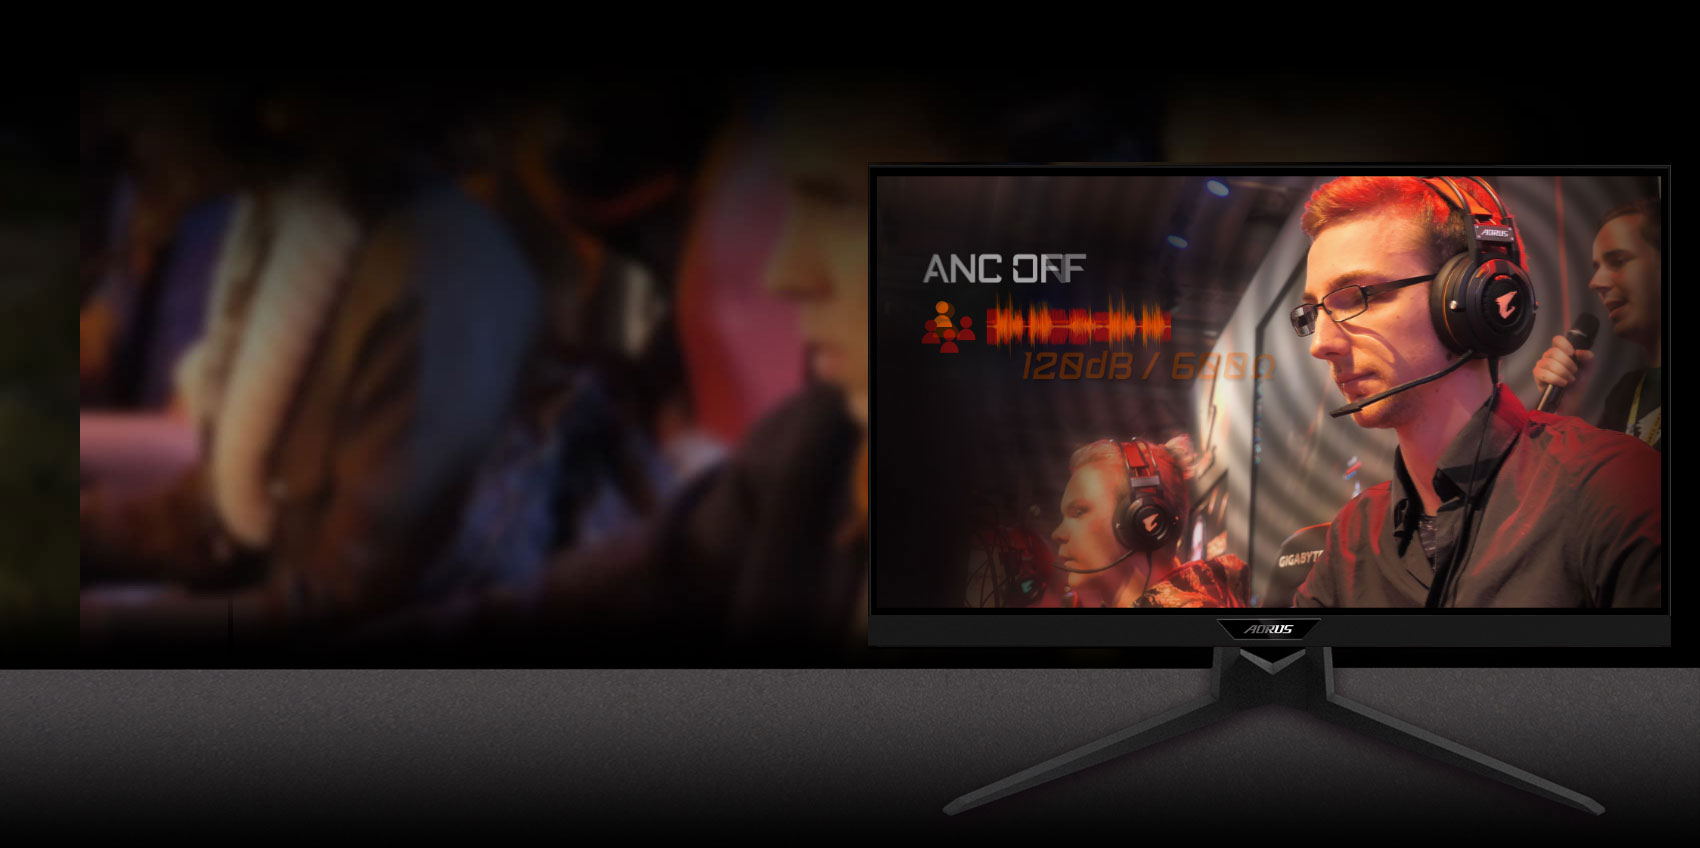 GIGABYTE AORUS FI27Q 27 Monitor Angled to the left, showing the effect of anc with a man is gaming